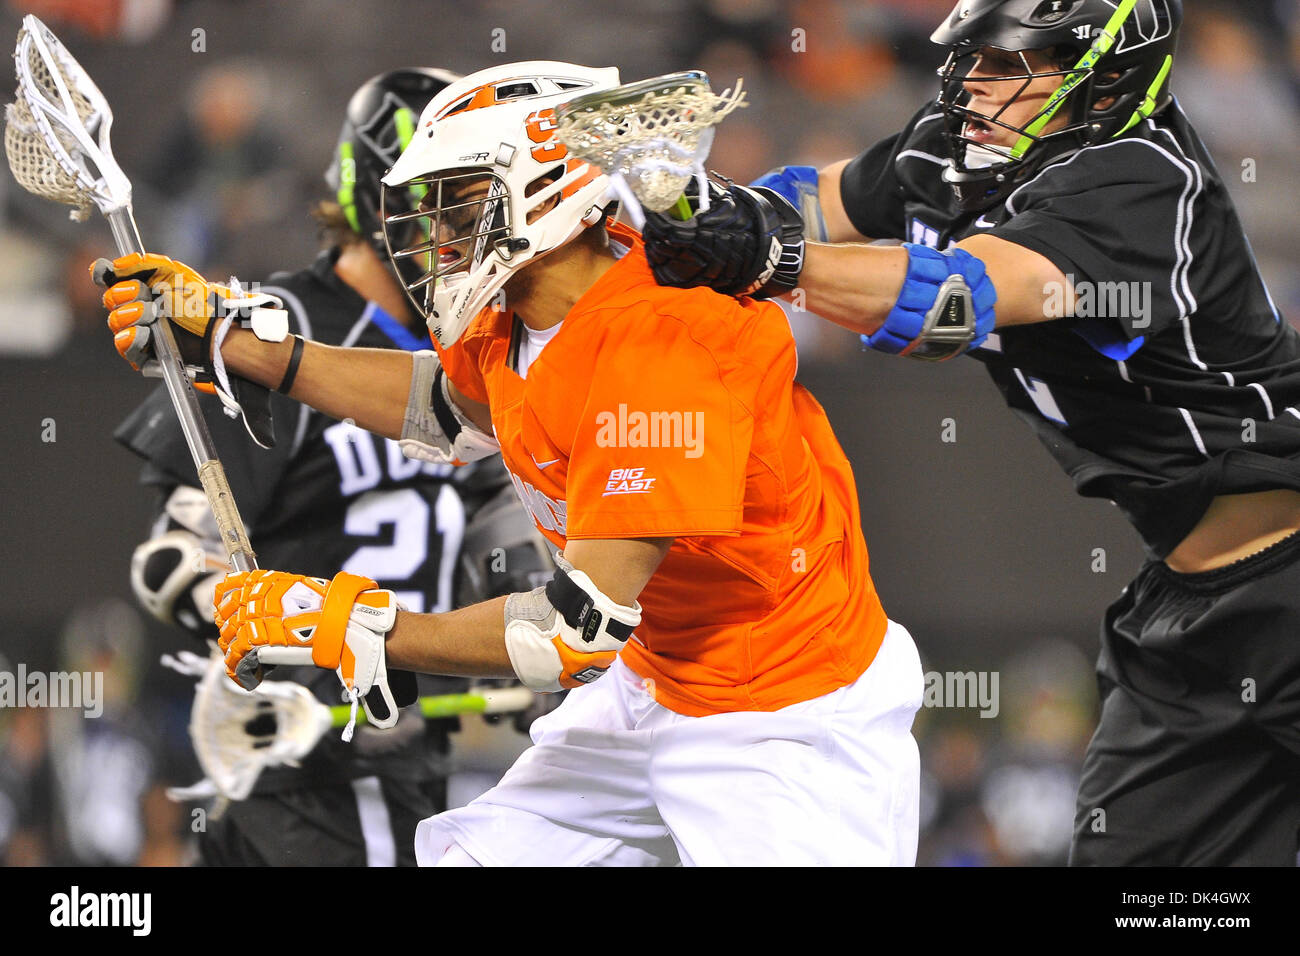 Apr. 3, 2011 - East Rutherford, New Jersey, U.S - Syracuse Orangeman in action during the Konica Minolta Big City Classic at The New Meadowlands Stadium in East Rutherford New Jersey Syracuse defeats Duke 13 to 11 (Credit Image: © Brooks Von Arx/Southcreek Global/ZUMAPRESS.com) Stock Photo